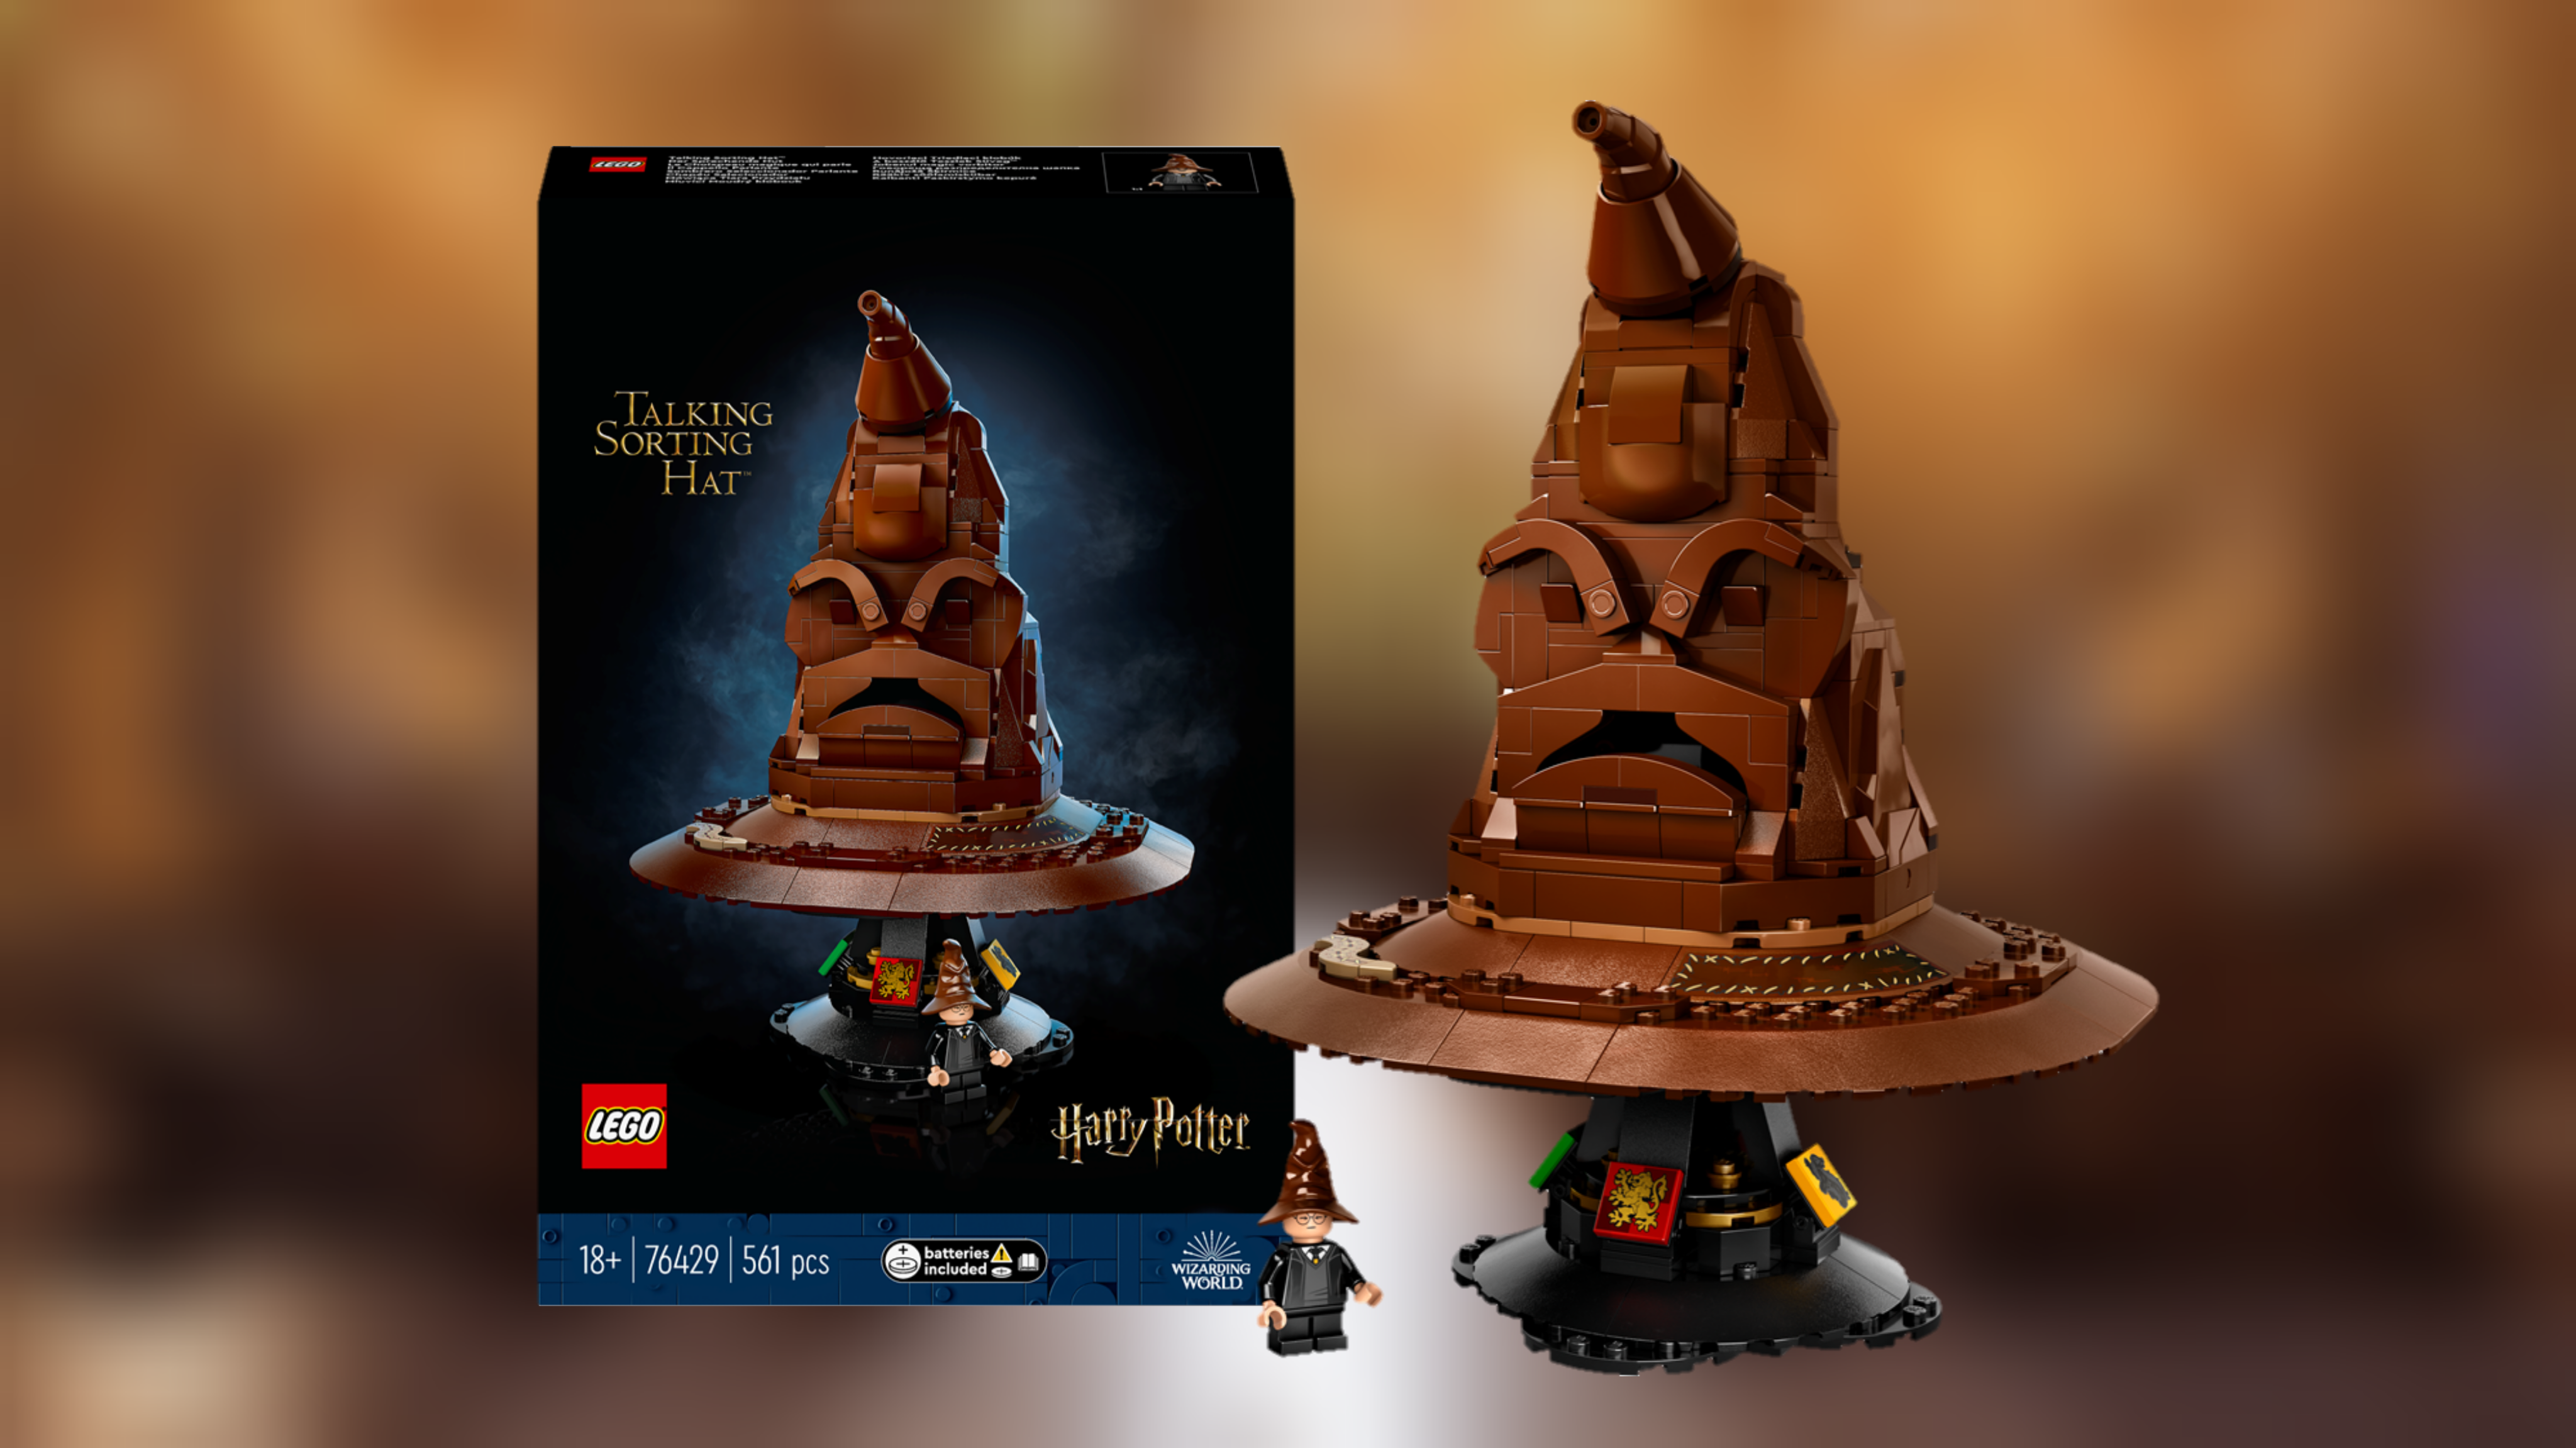 LEGO Harry Potter 2024 Talking Sorting Hat: First look